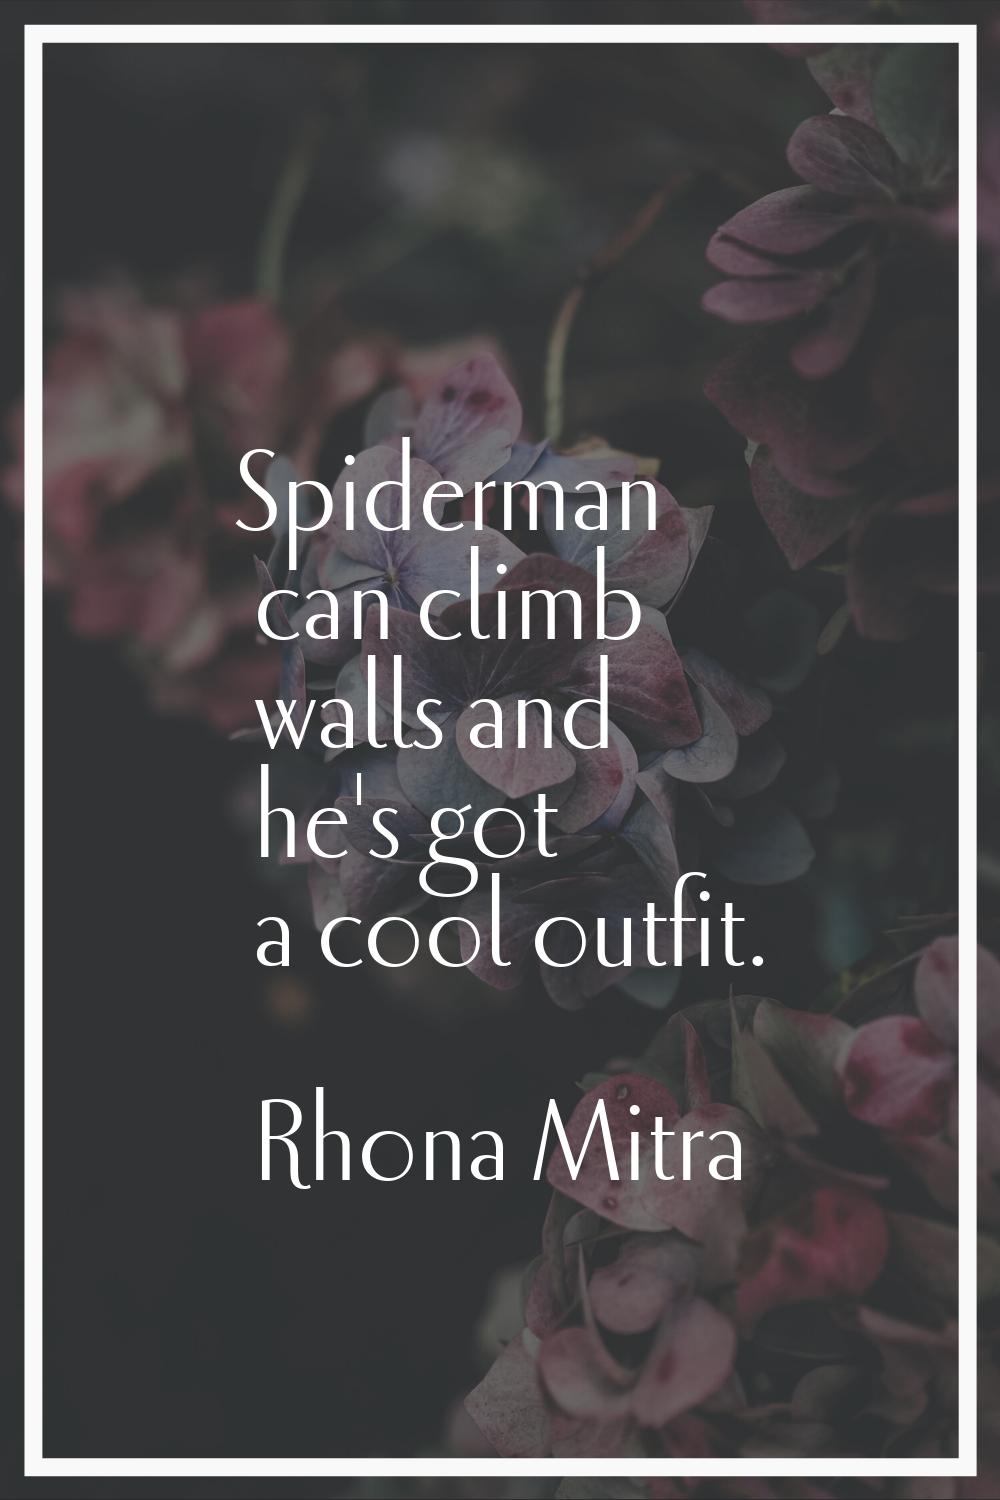 Spiderman can climb walls and he's got a cool outfit.